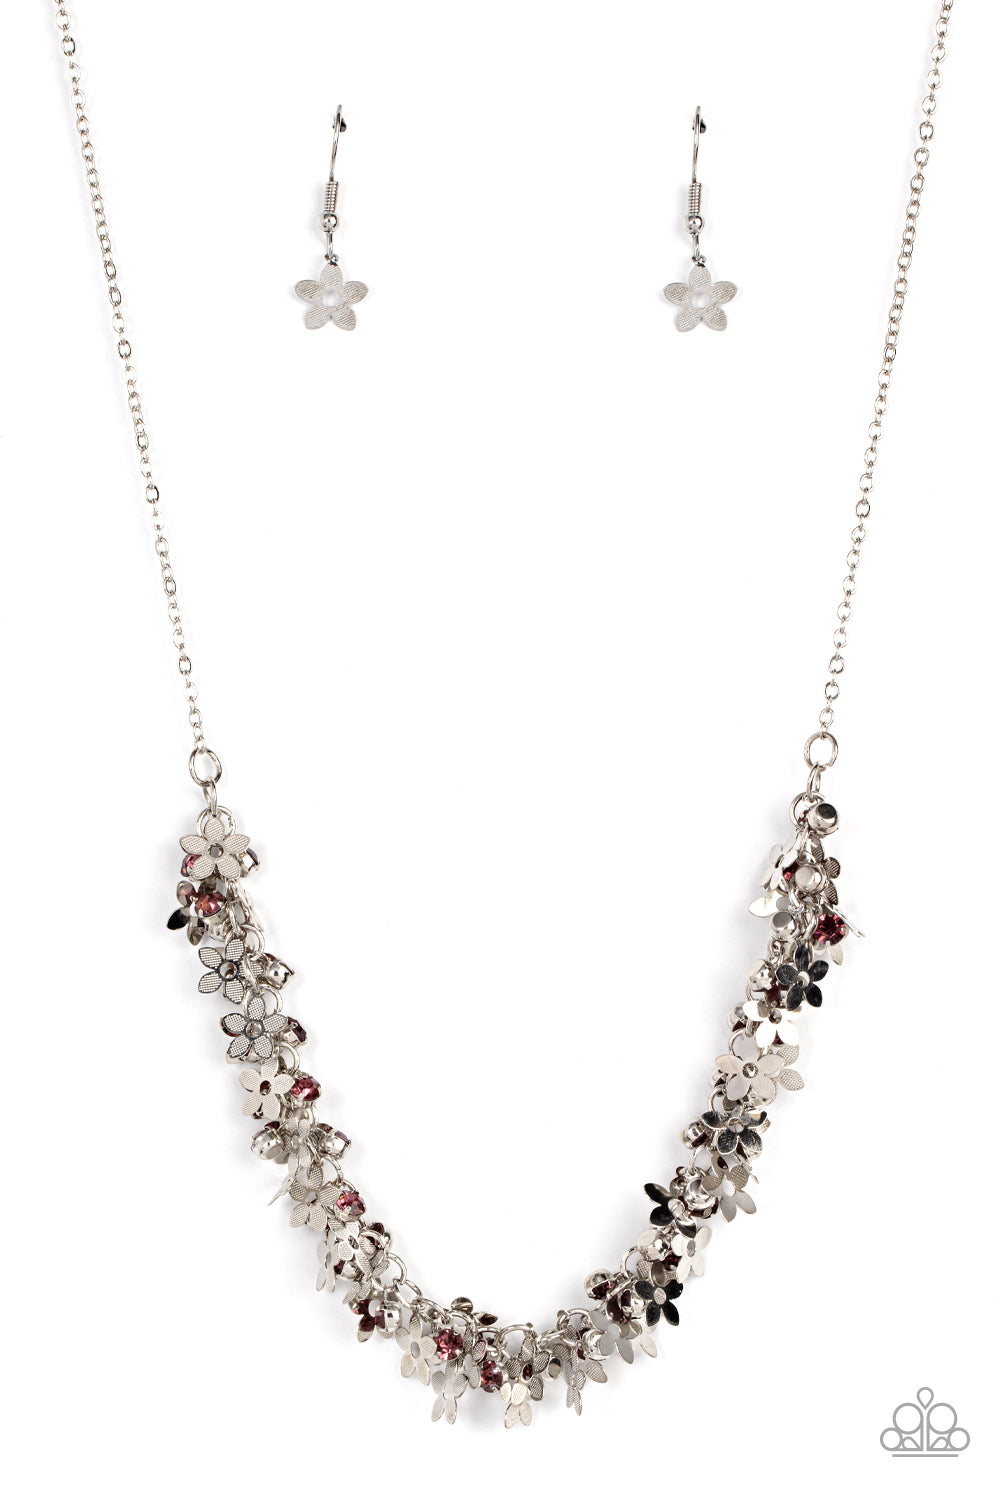 Paparazzi Necklace - Fearlessly Floral - Purple